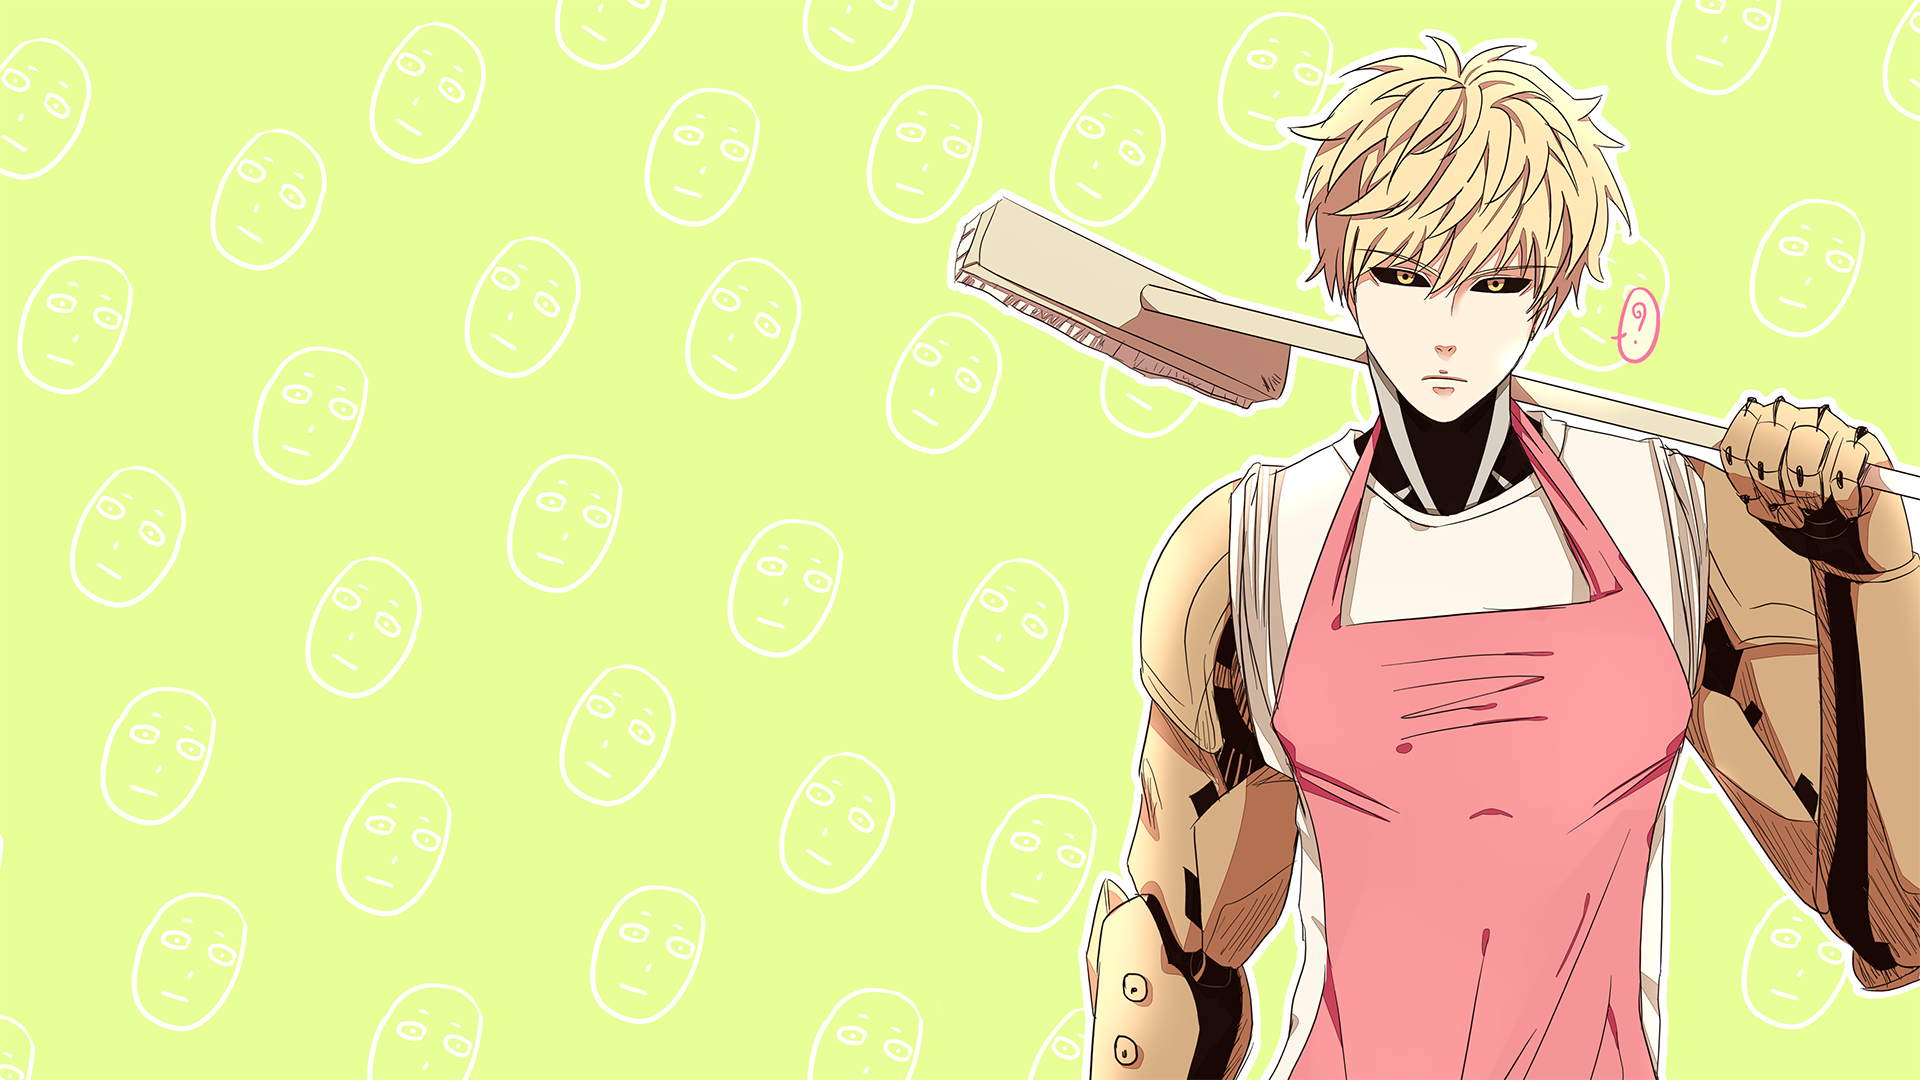 1920x1080 Anime One-Punch Man Genos (One-Punch Man) One Punch-Man Wallpaper | One punch man, One punch man anime, One punch